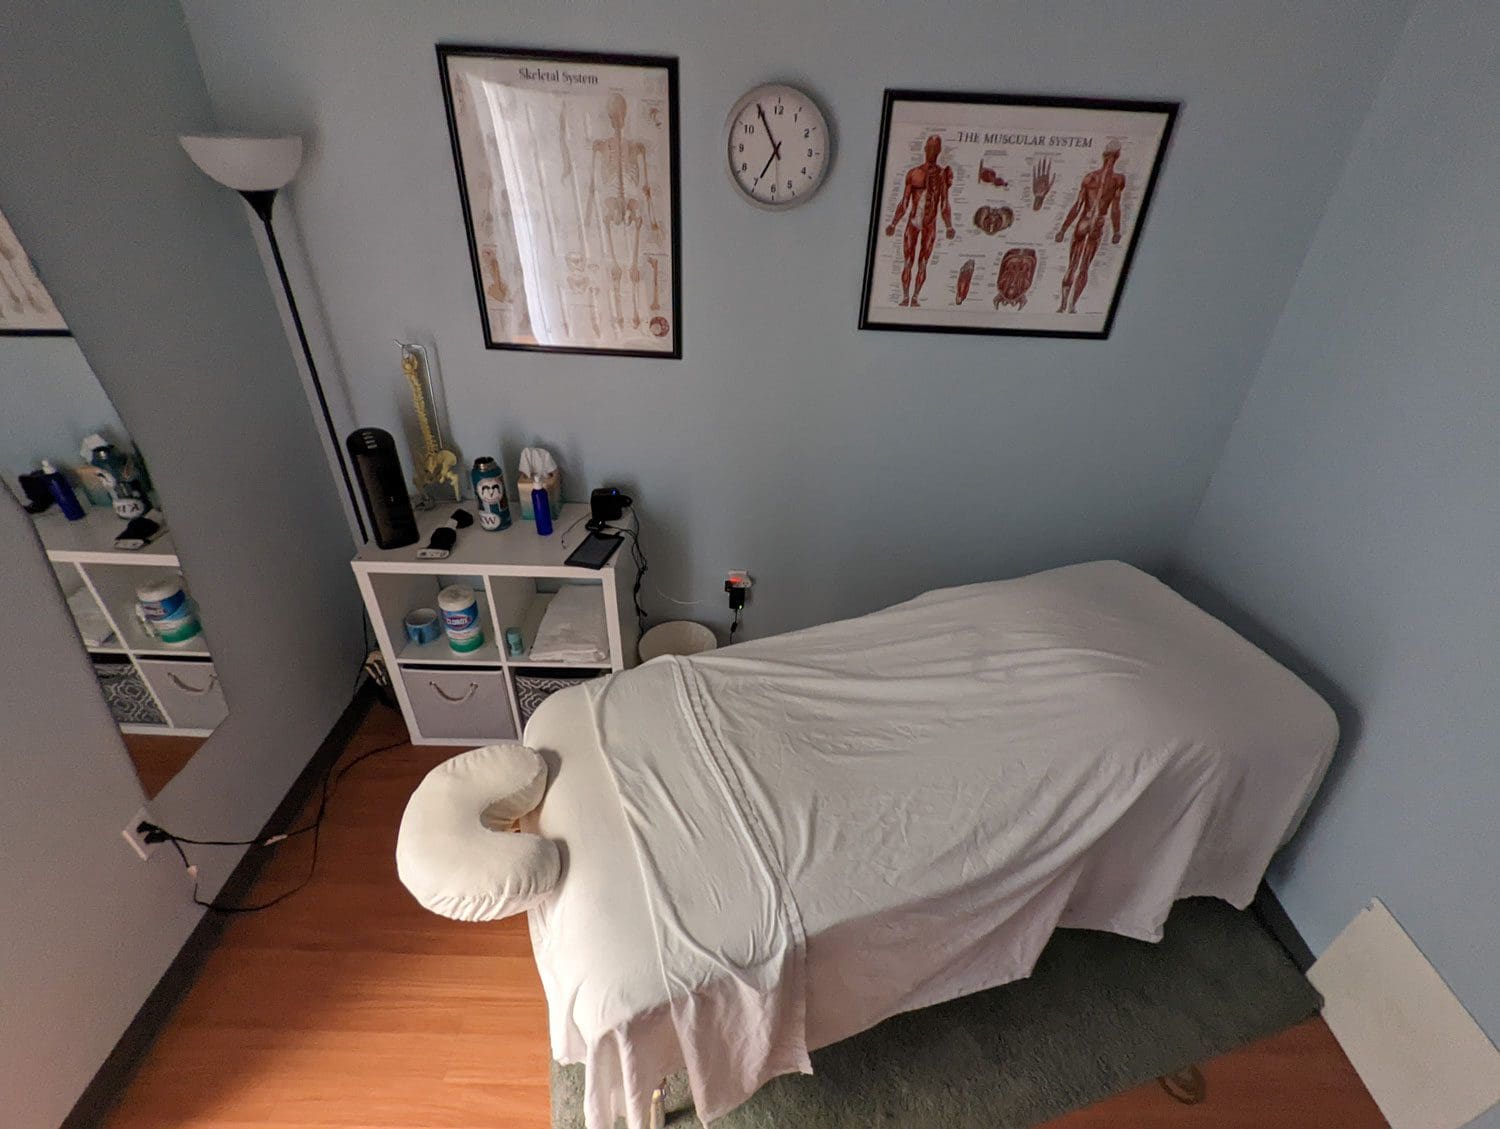 Chiropractic massage therapy room at Hazel Dell clinic in Washington.